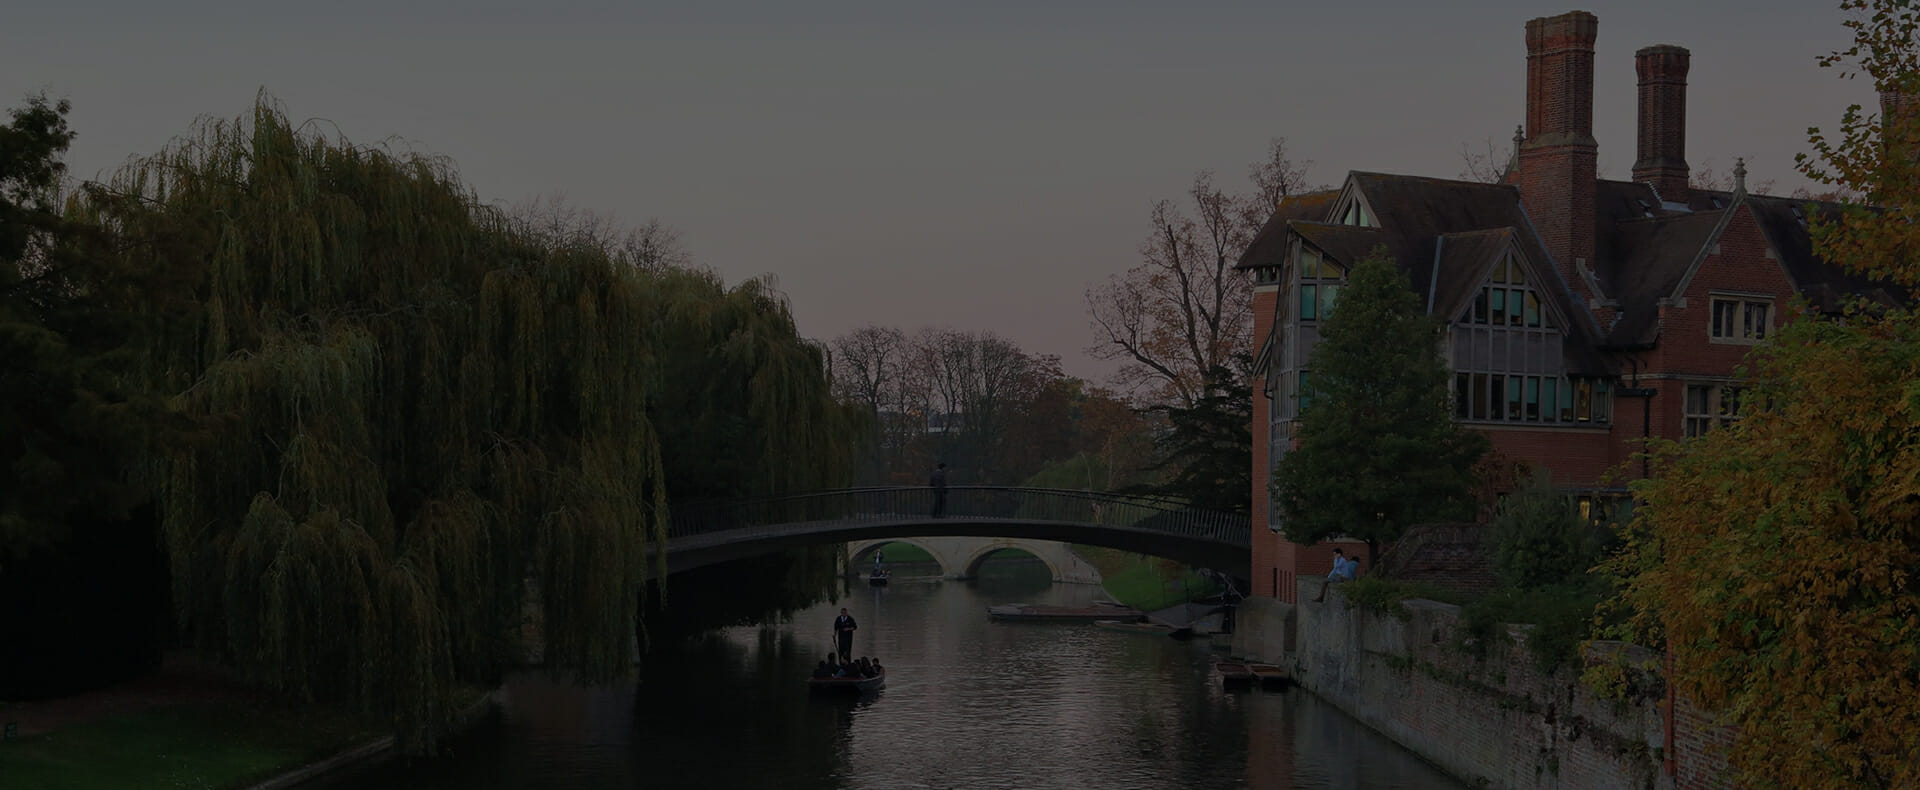 trees, a bridge, and a house over looking the river cam in cambridge with a punt on the river